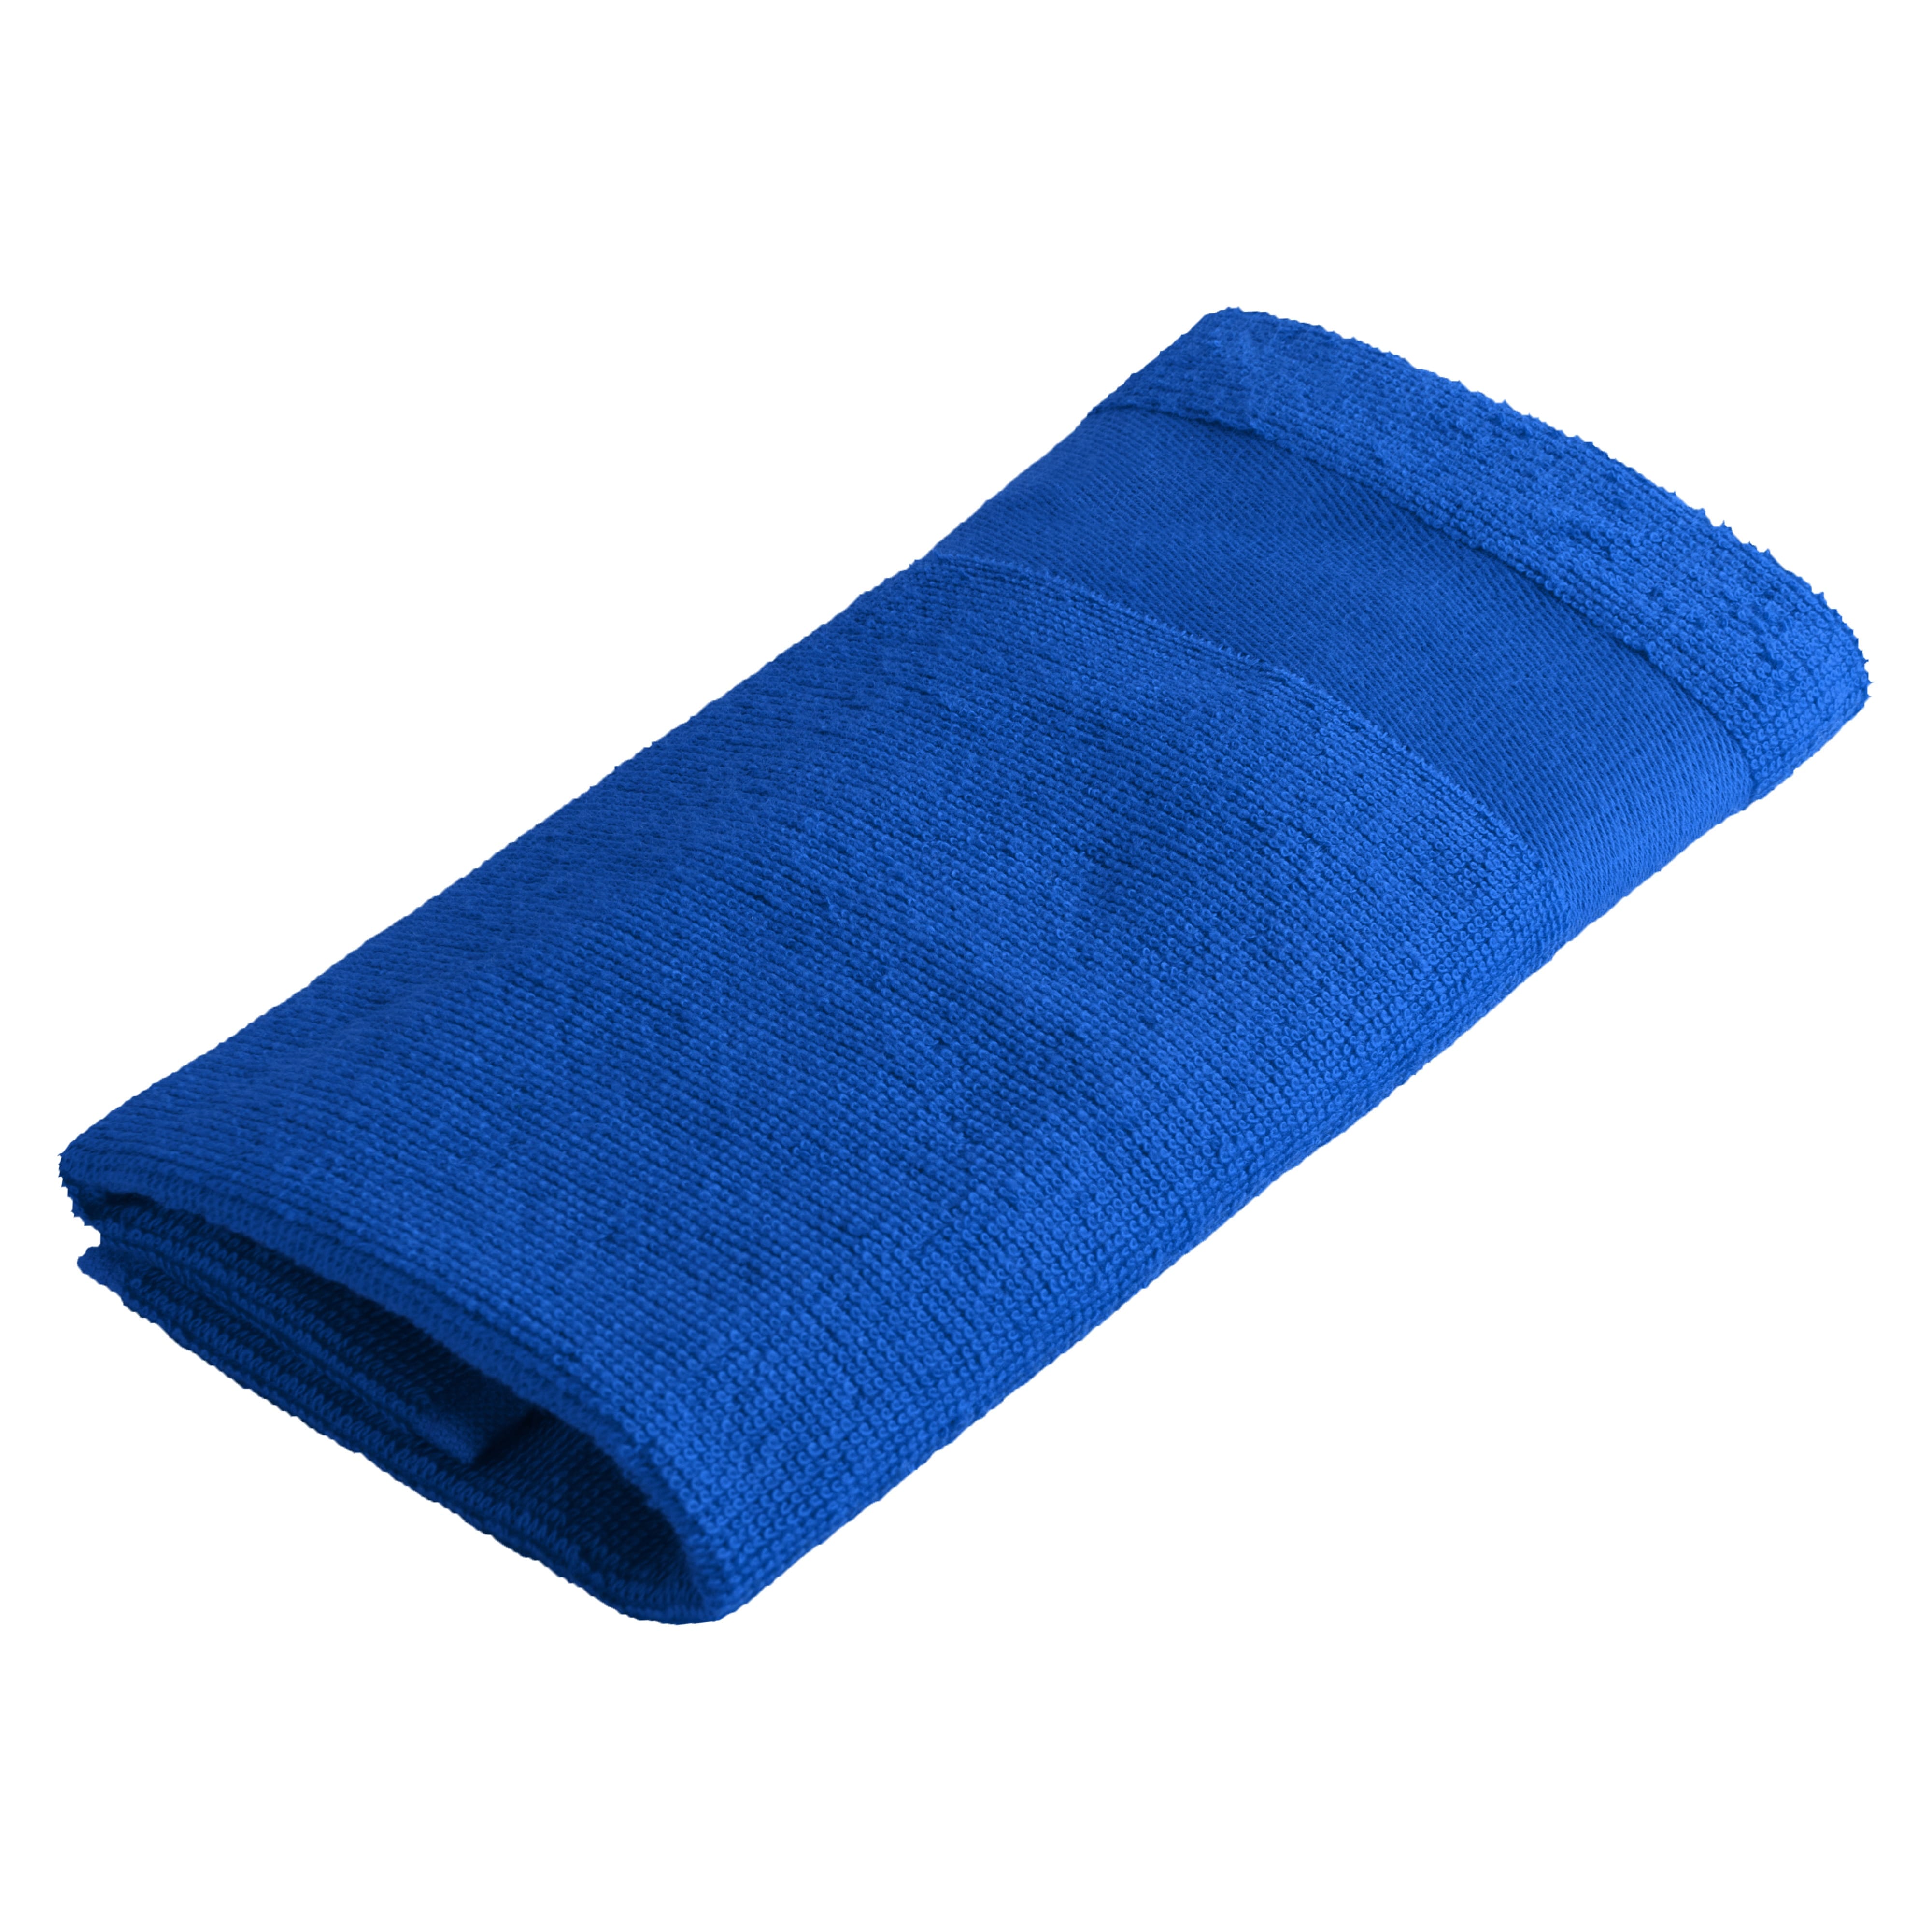 Colorful Guest Towels - Piddlehinton - Guildford